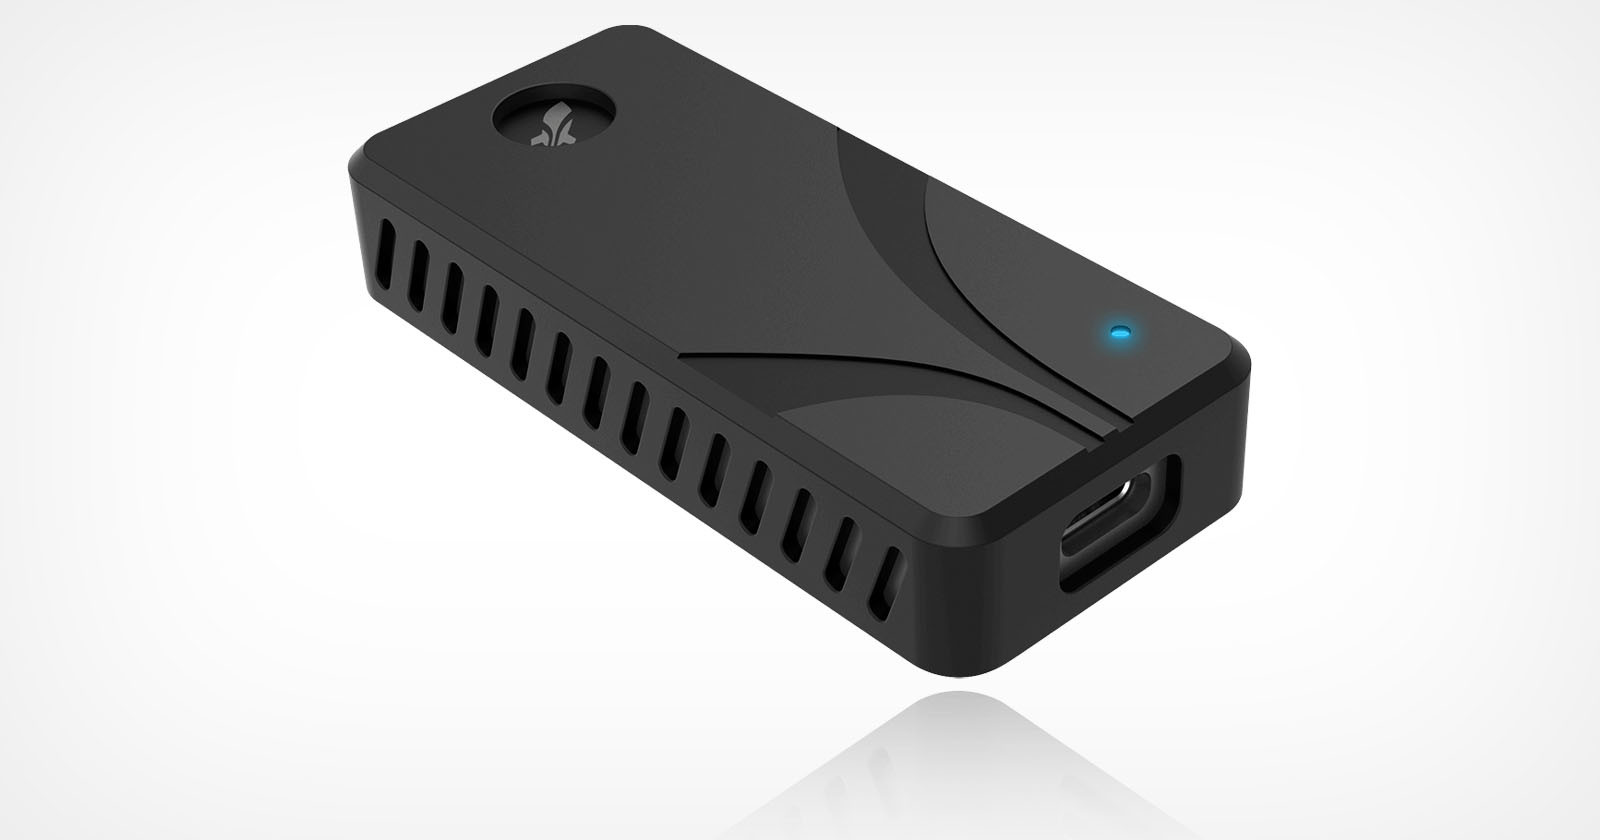 Sabrent’s Nano V2 External SSD is Tiny, Rugged, Fast, and High Capacity